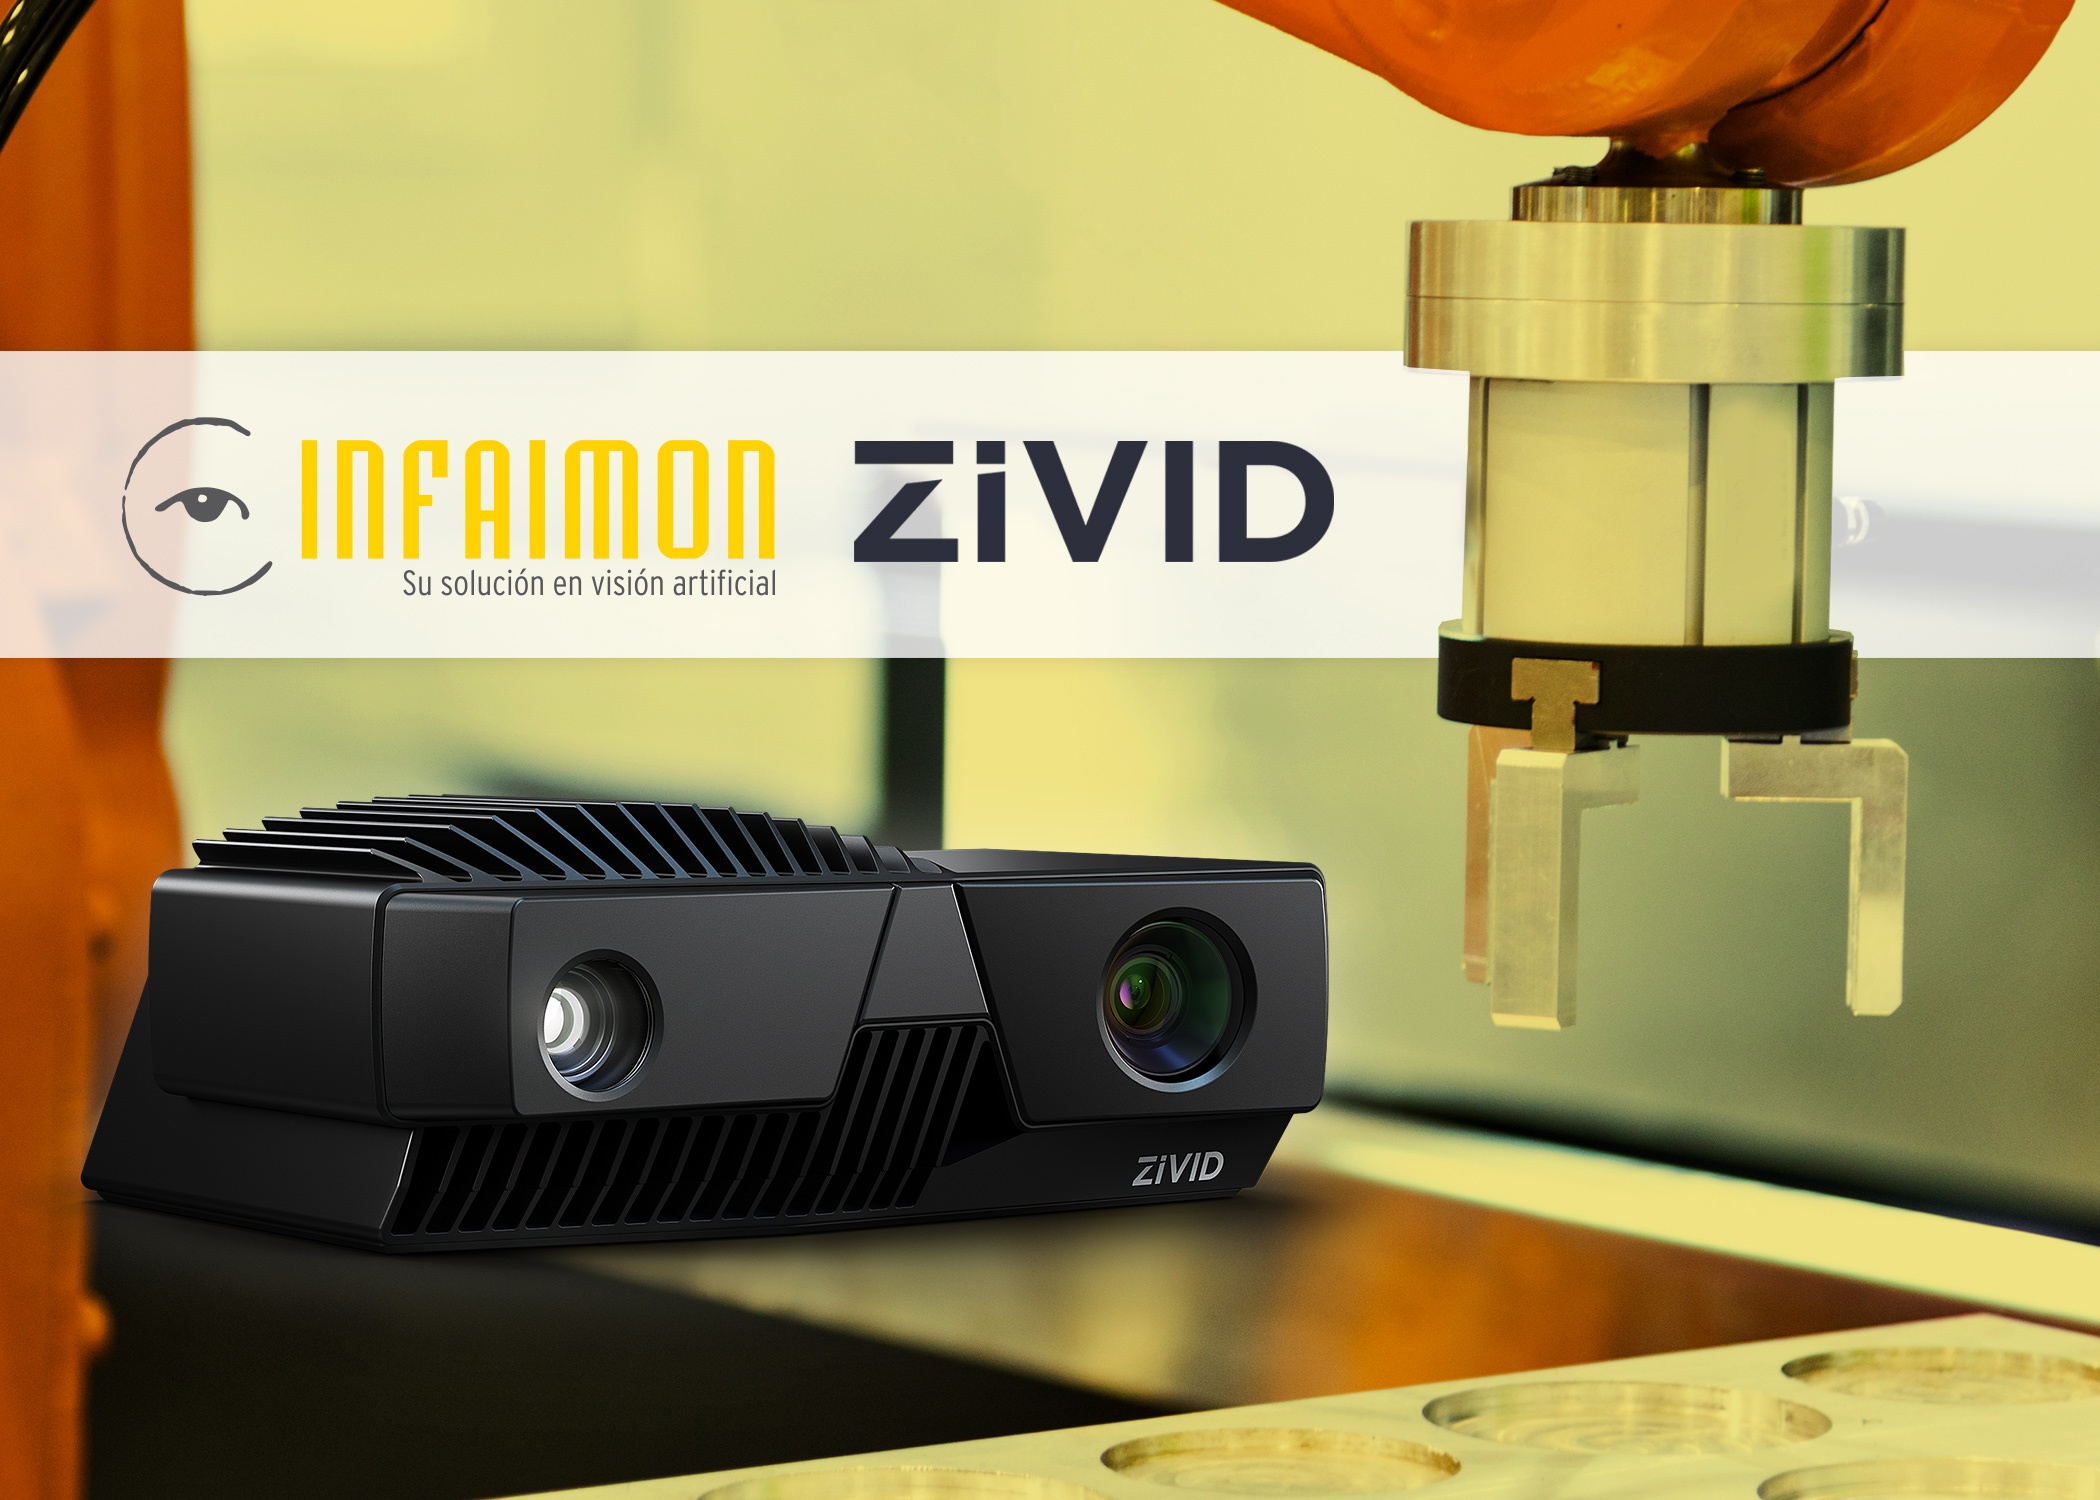 Zivid and INFAIMON expands 3D vision availability